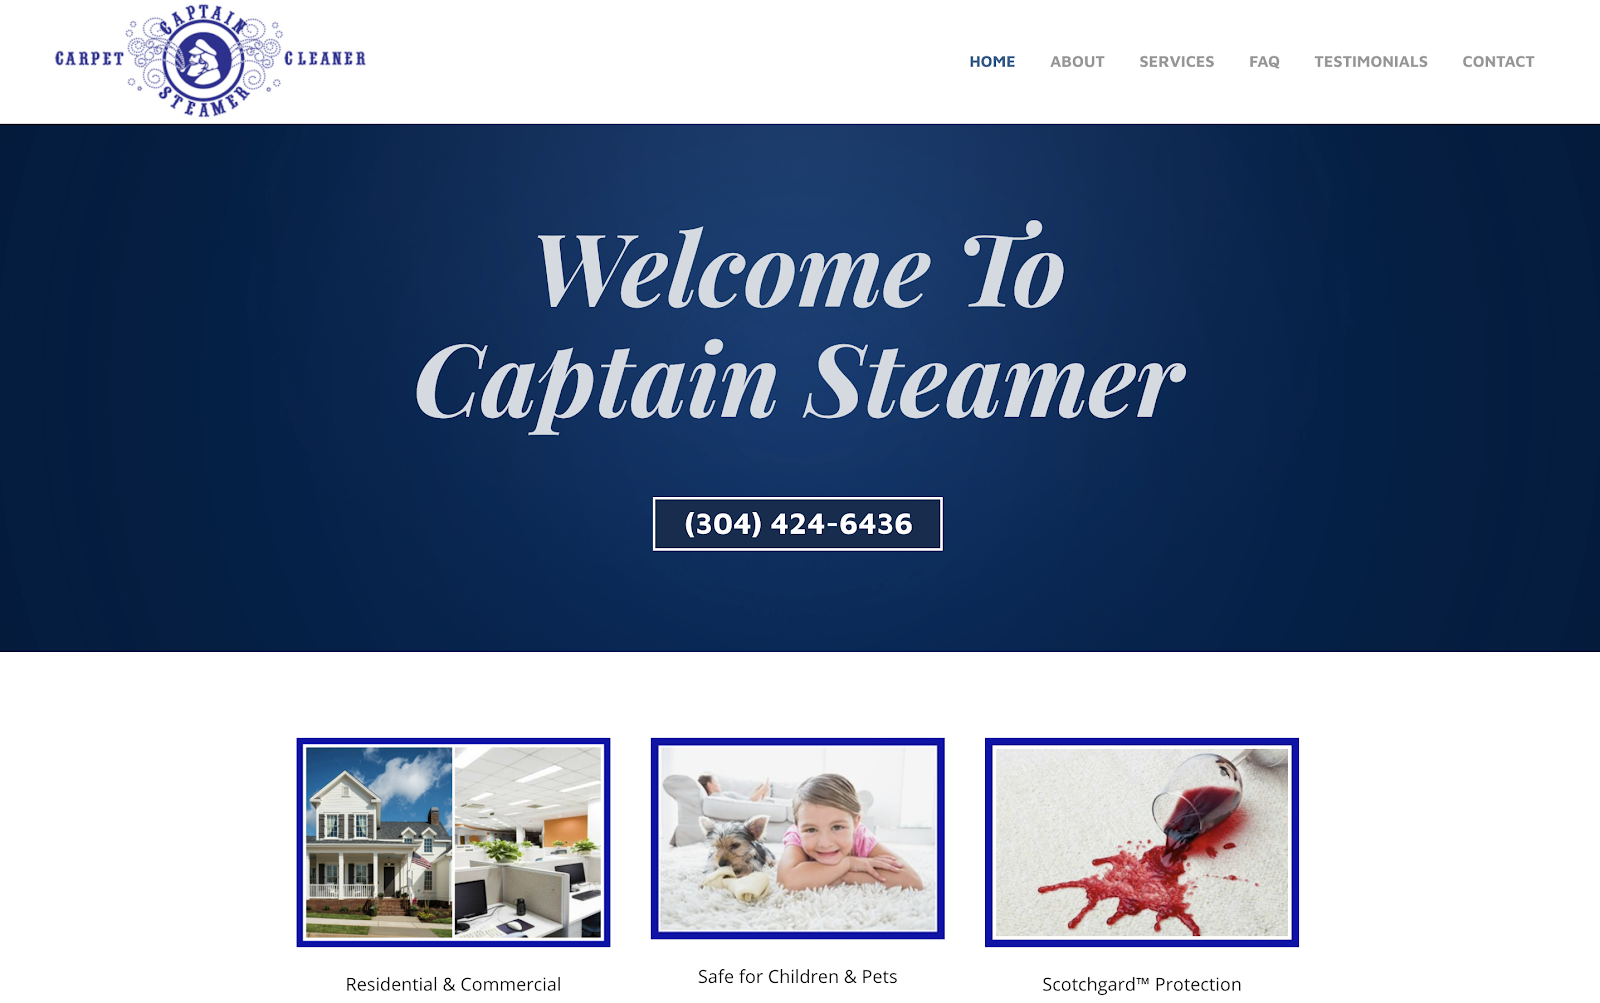 home page of captain steamer website